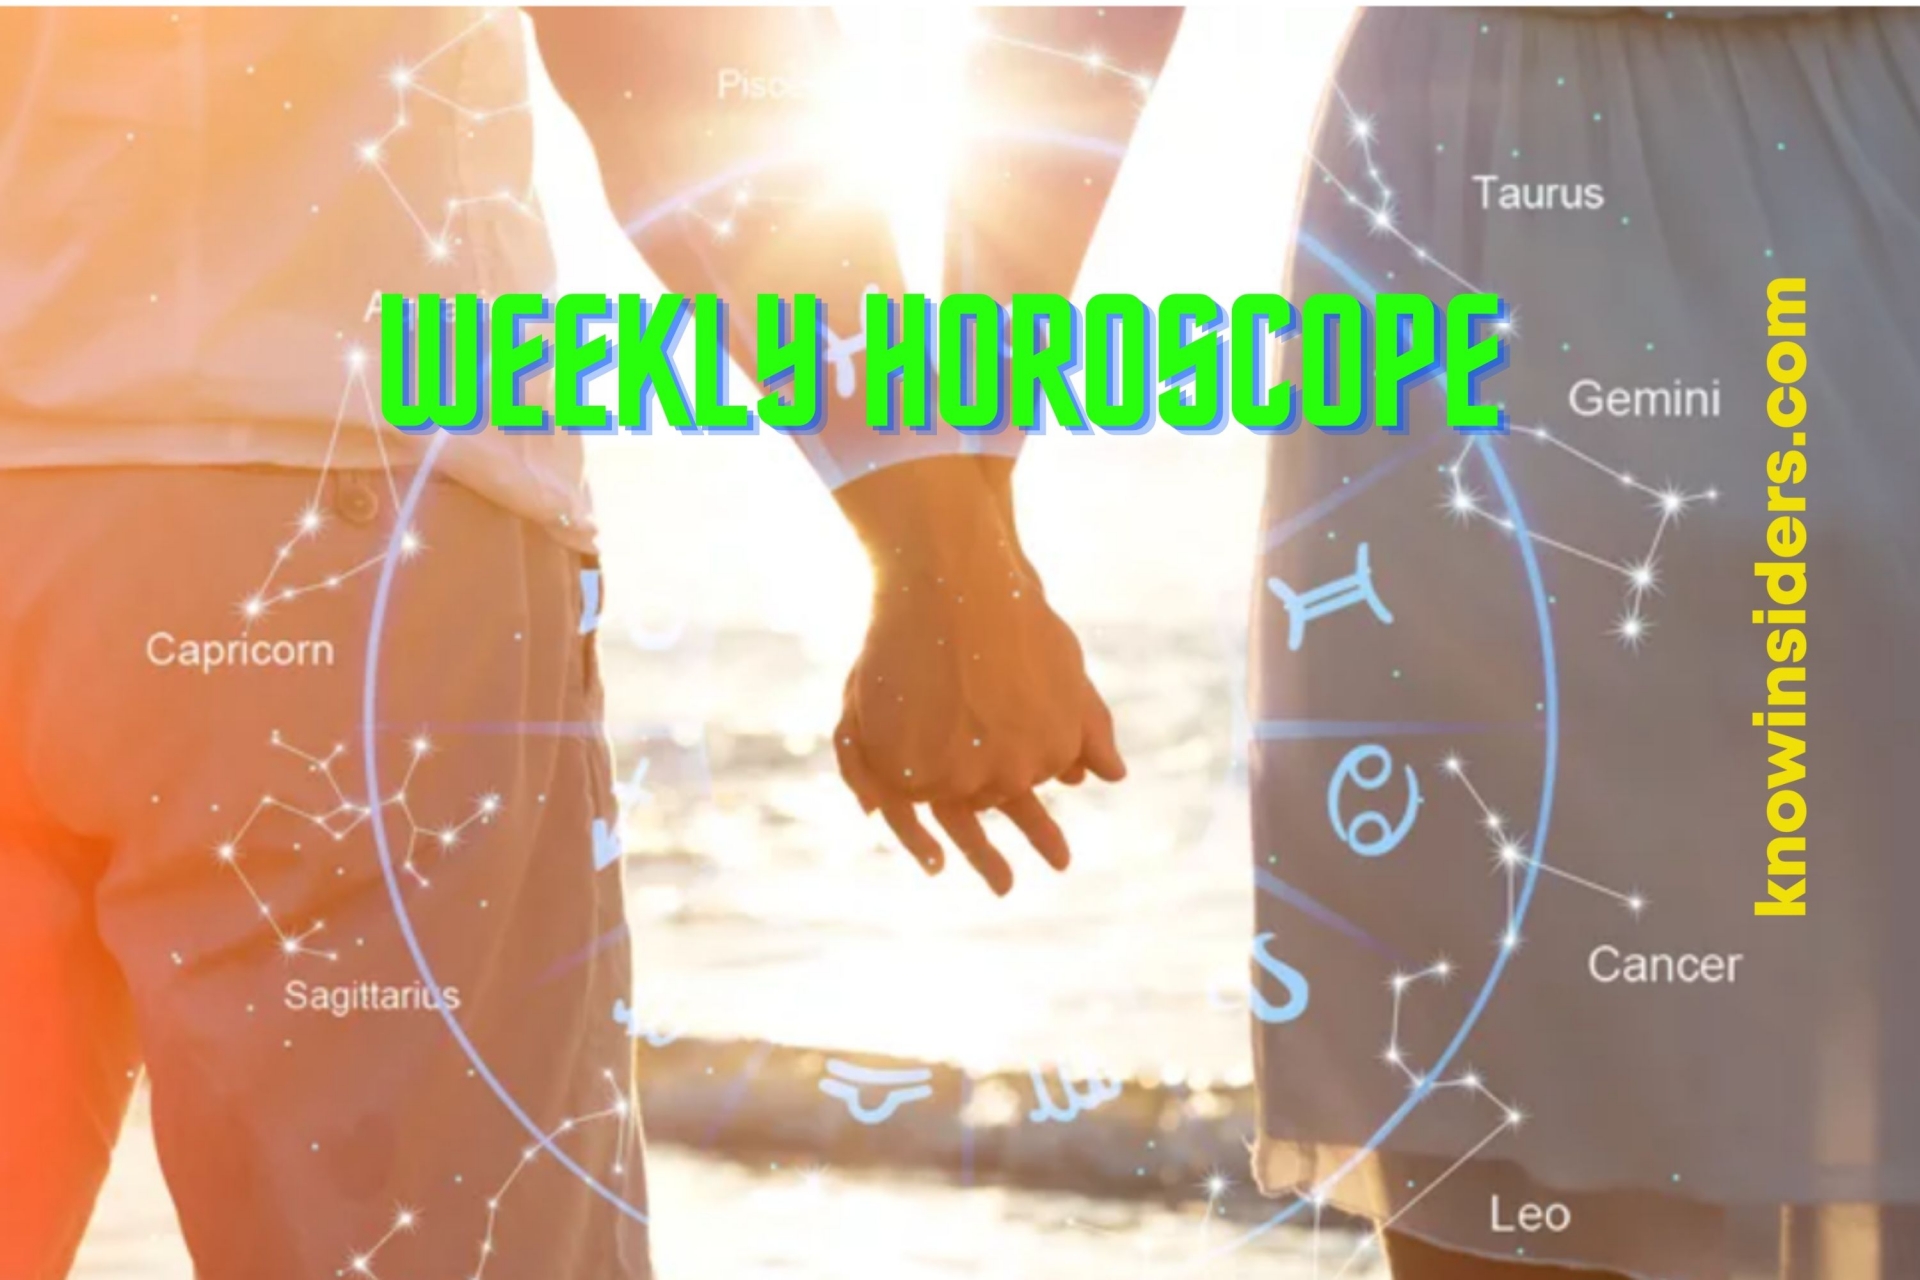 Weekly Horoscope 2 - 8 August, 2021: Prediction for Health, Love, Money, Career